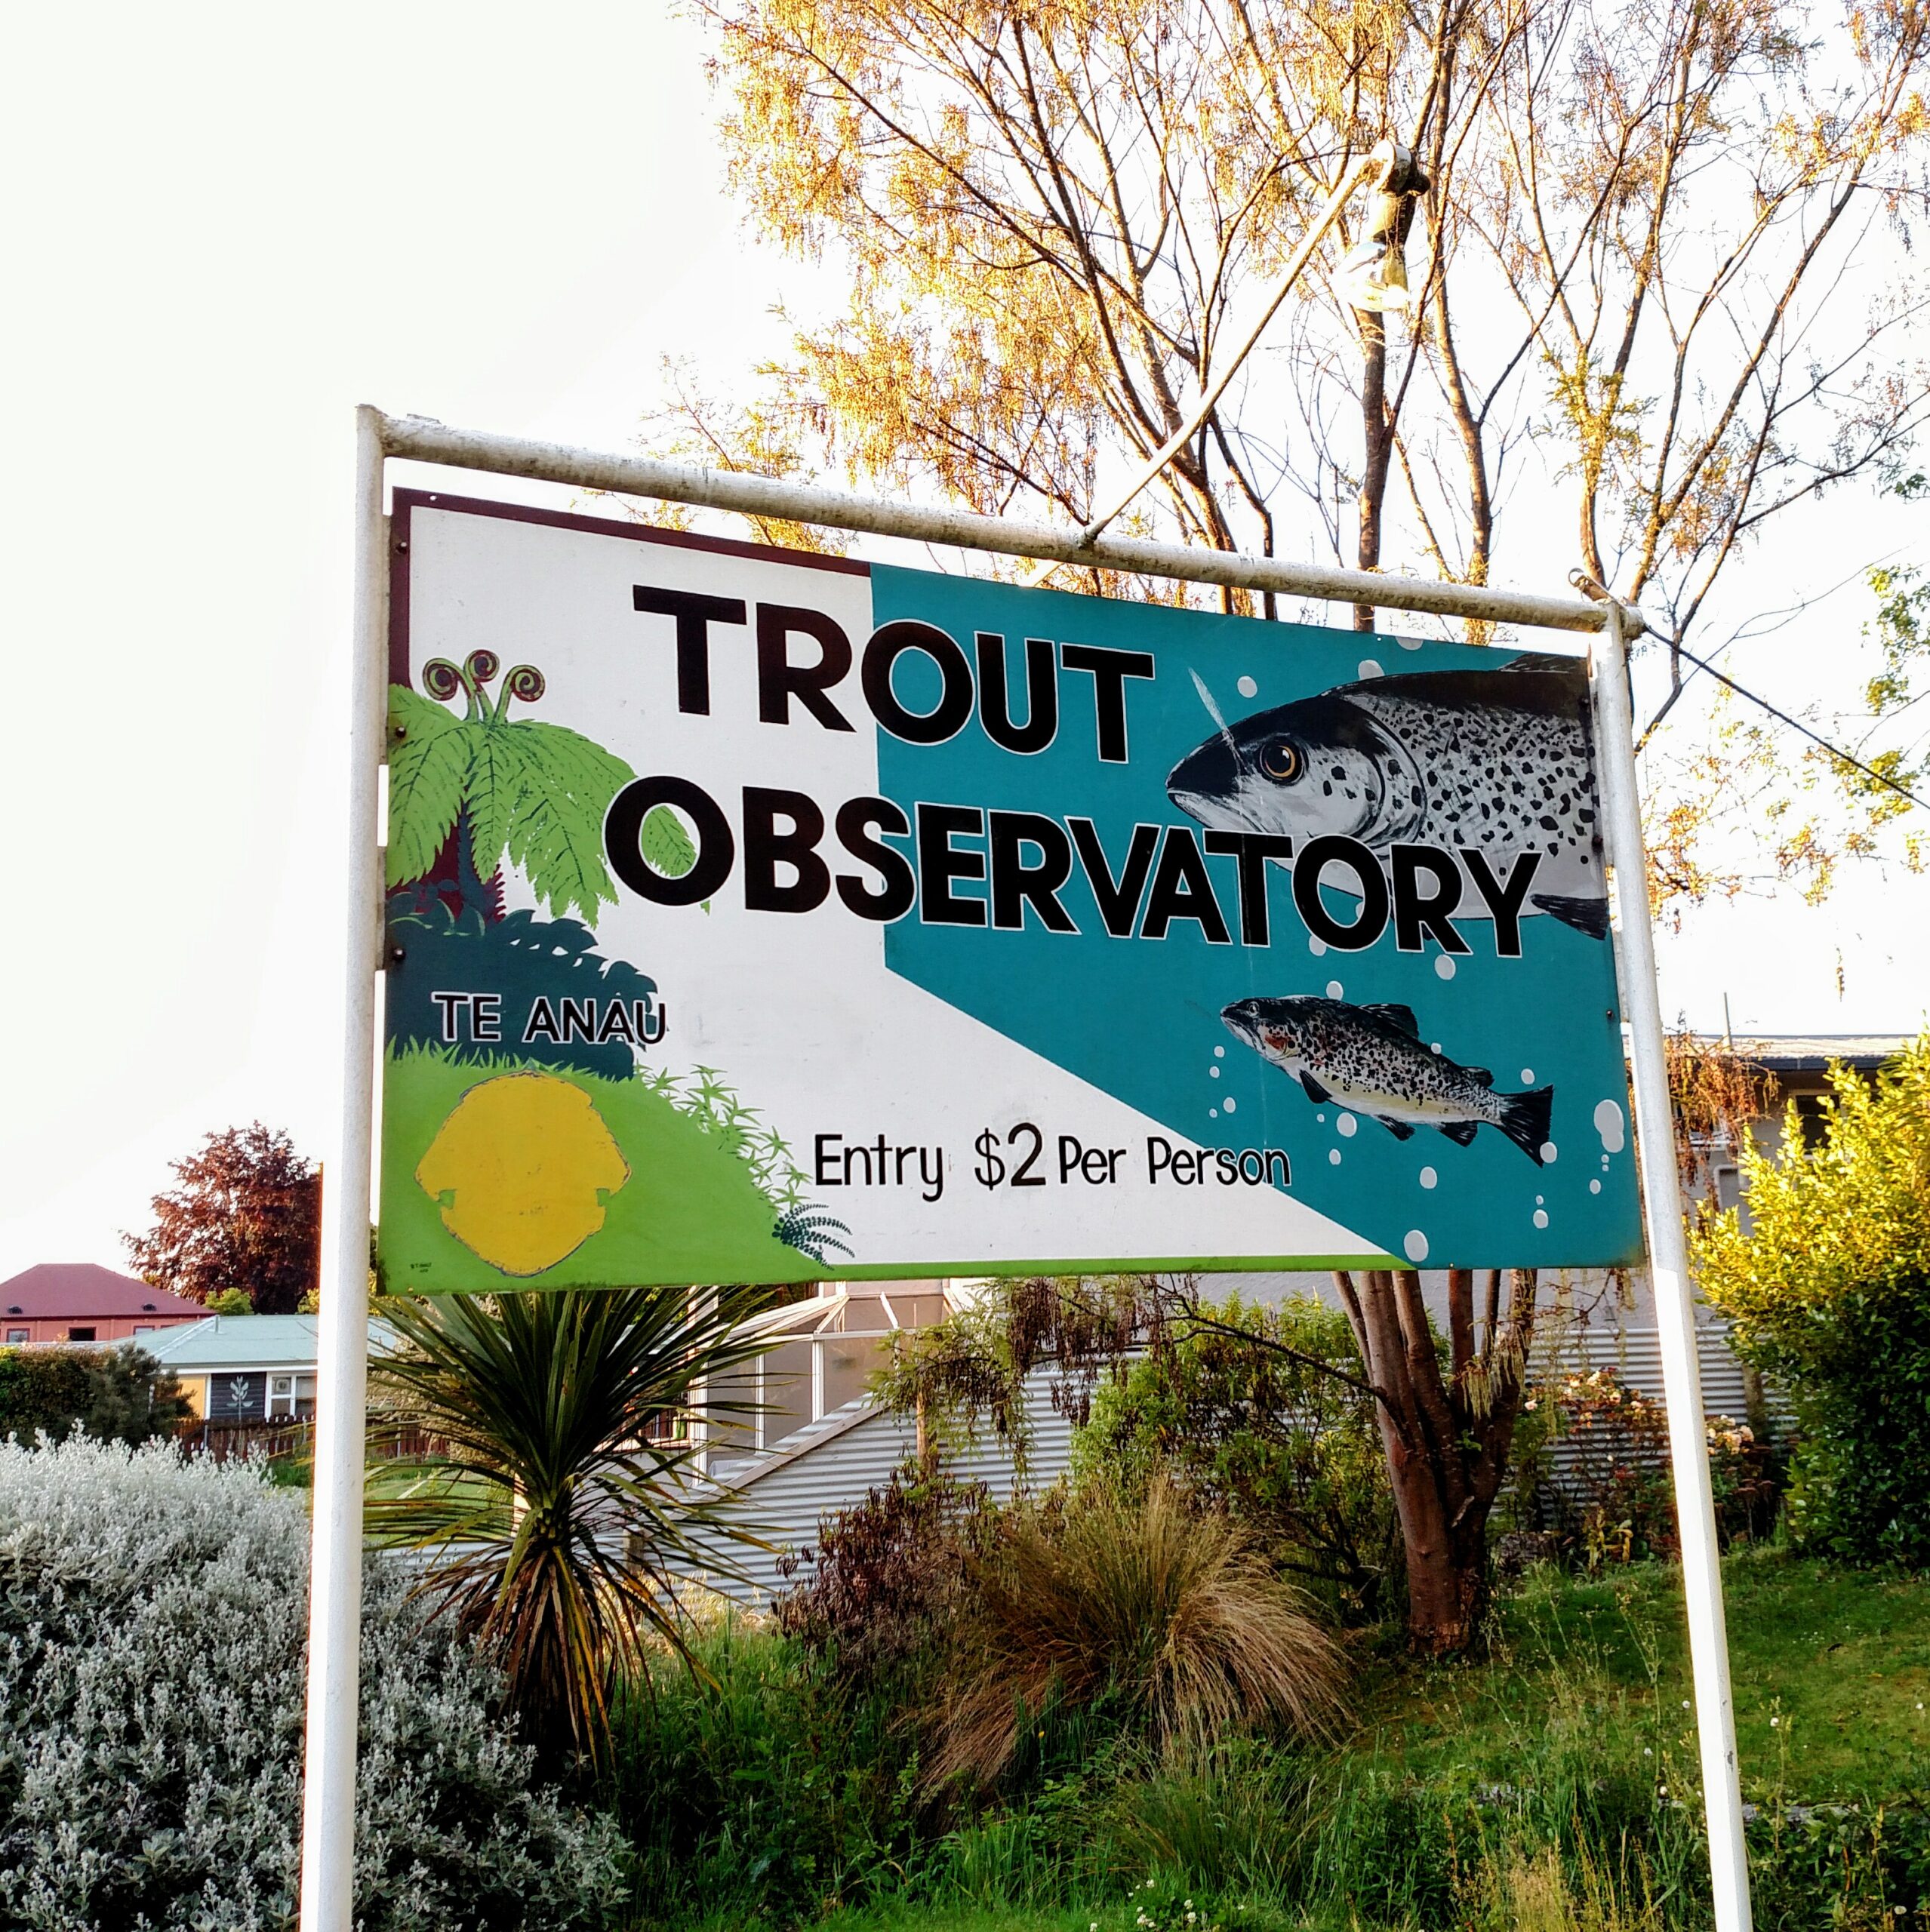 Trout observatory: tourist traps are everywhere